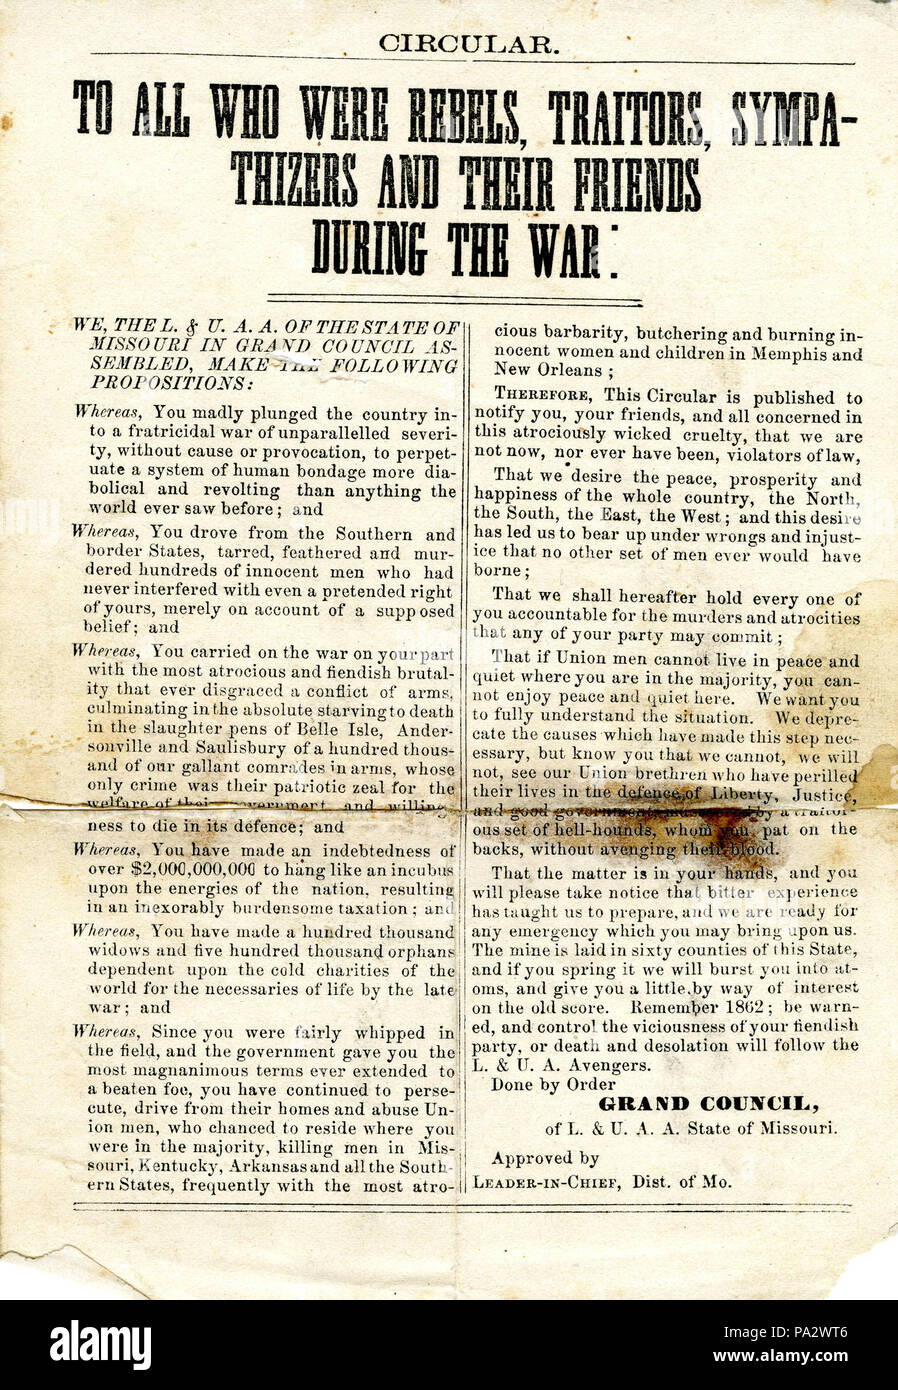 Circular titled “To All Who Were Rebels, Traitors, Sympathizers and Their Friends during the War,” provided by the Grand Council of the of the L. & U.A.A. of the State of Missouri, page one, no date. Civil War Collection, Missouri History Museum, St. Louis, Missouri. 314 Circular- “To All Who Were Rebels, Traitors, Sympathizers and Their Friends during the War,” ca. 1870 Stock Photo